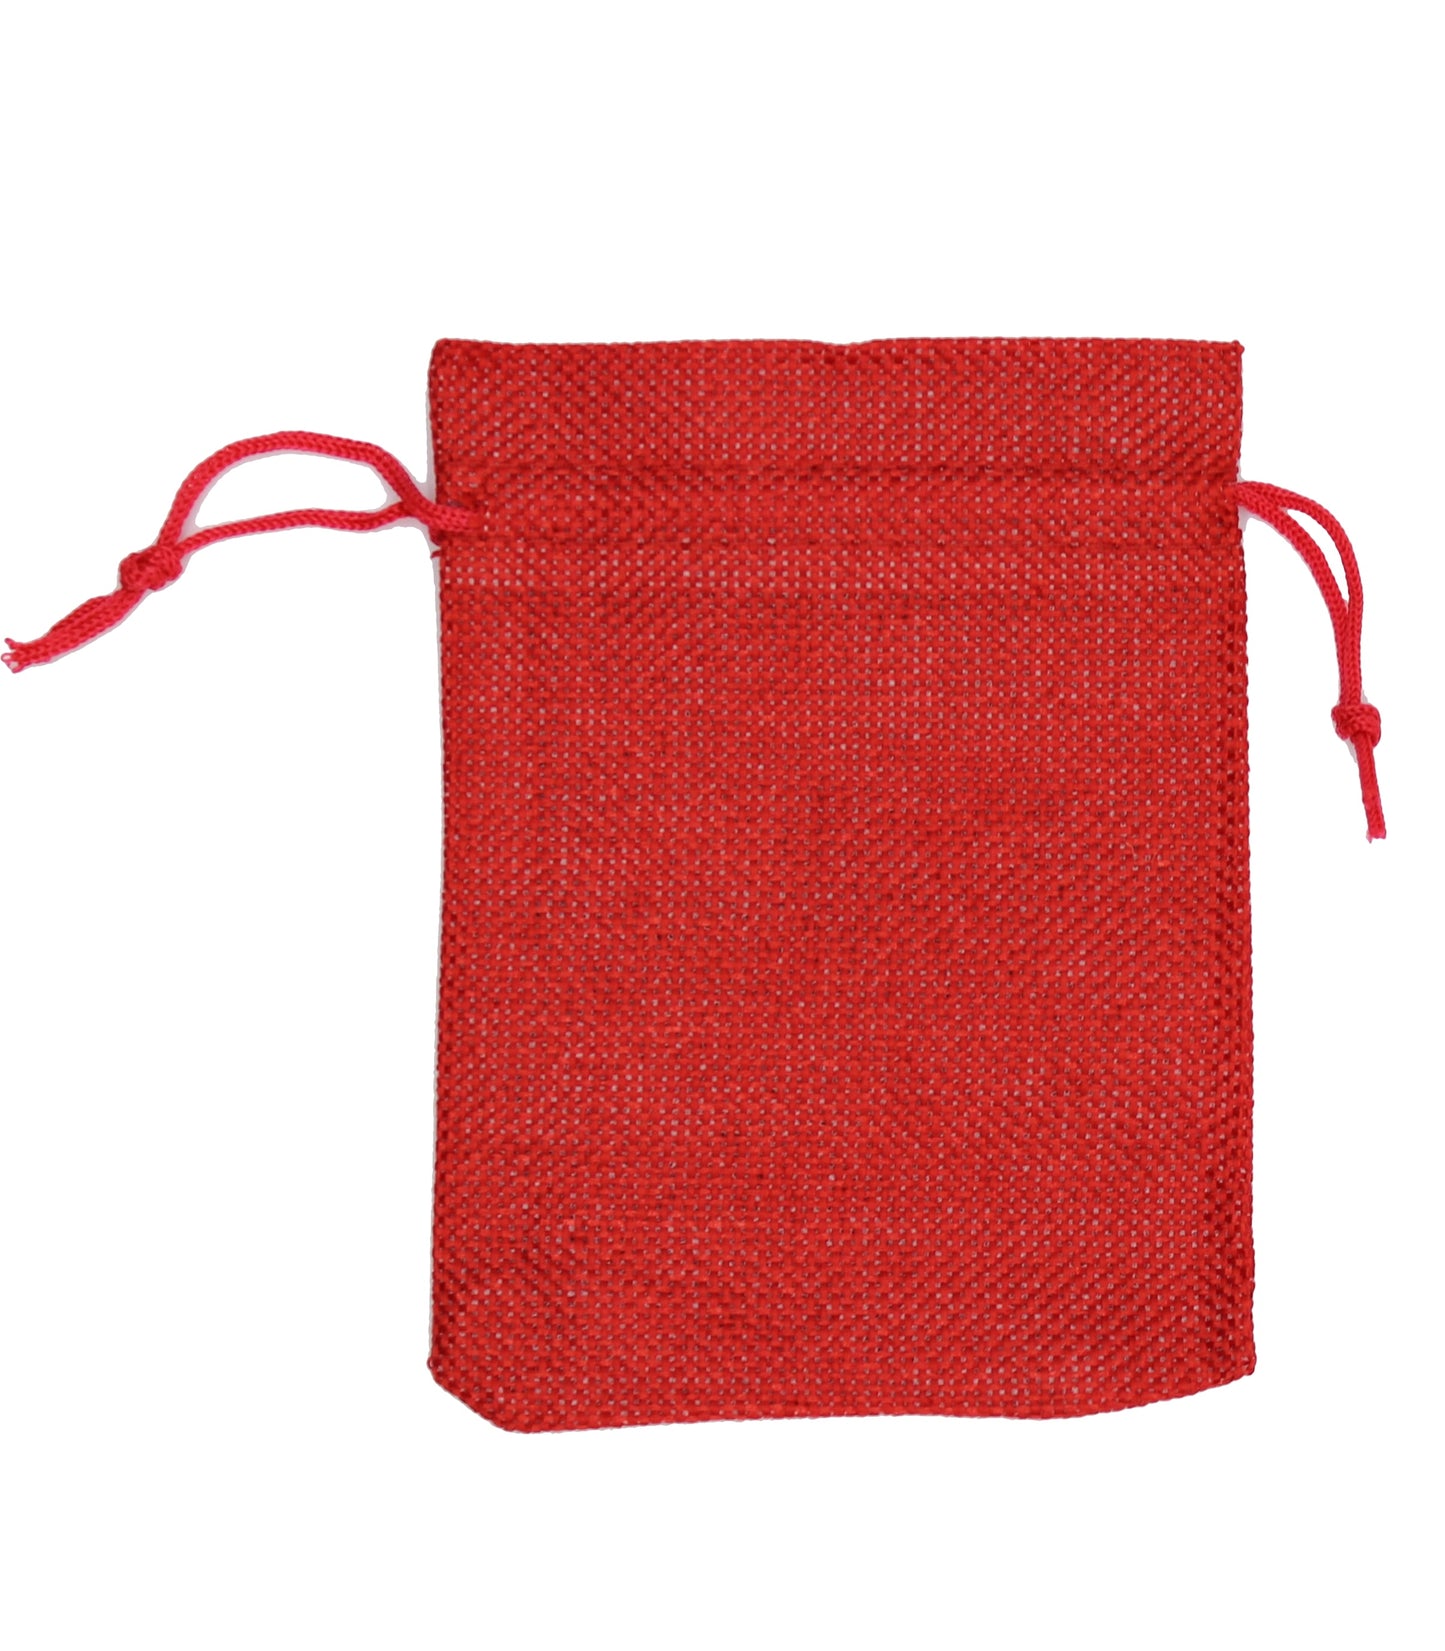 Jute Pouch - Red